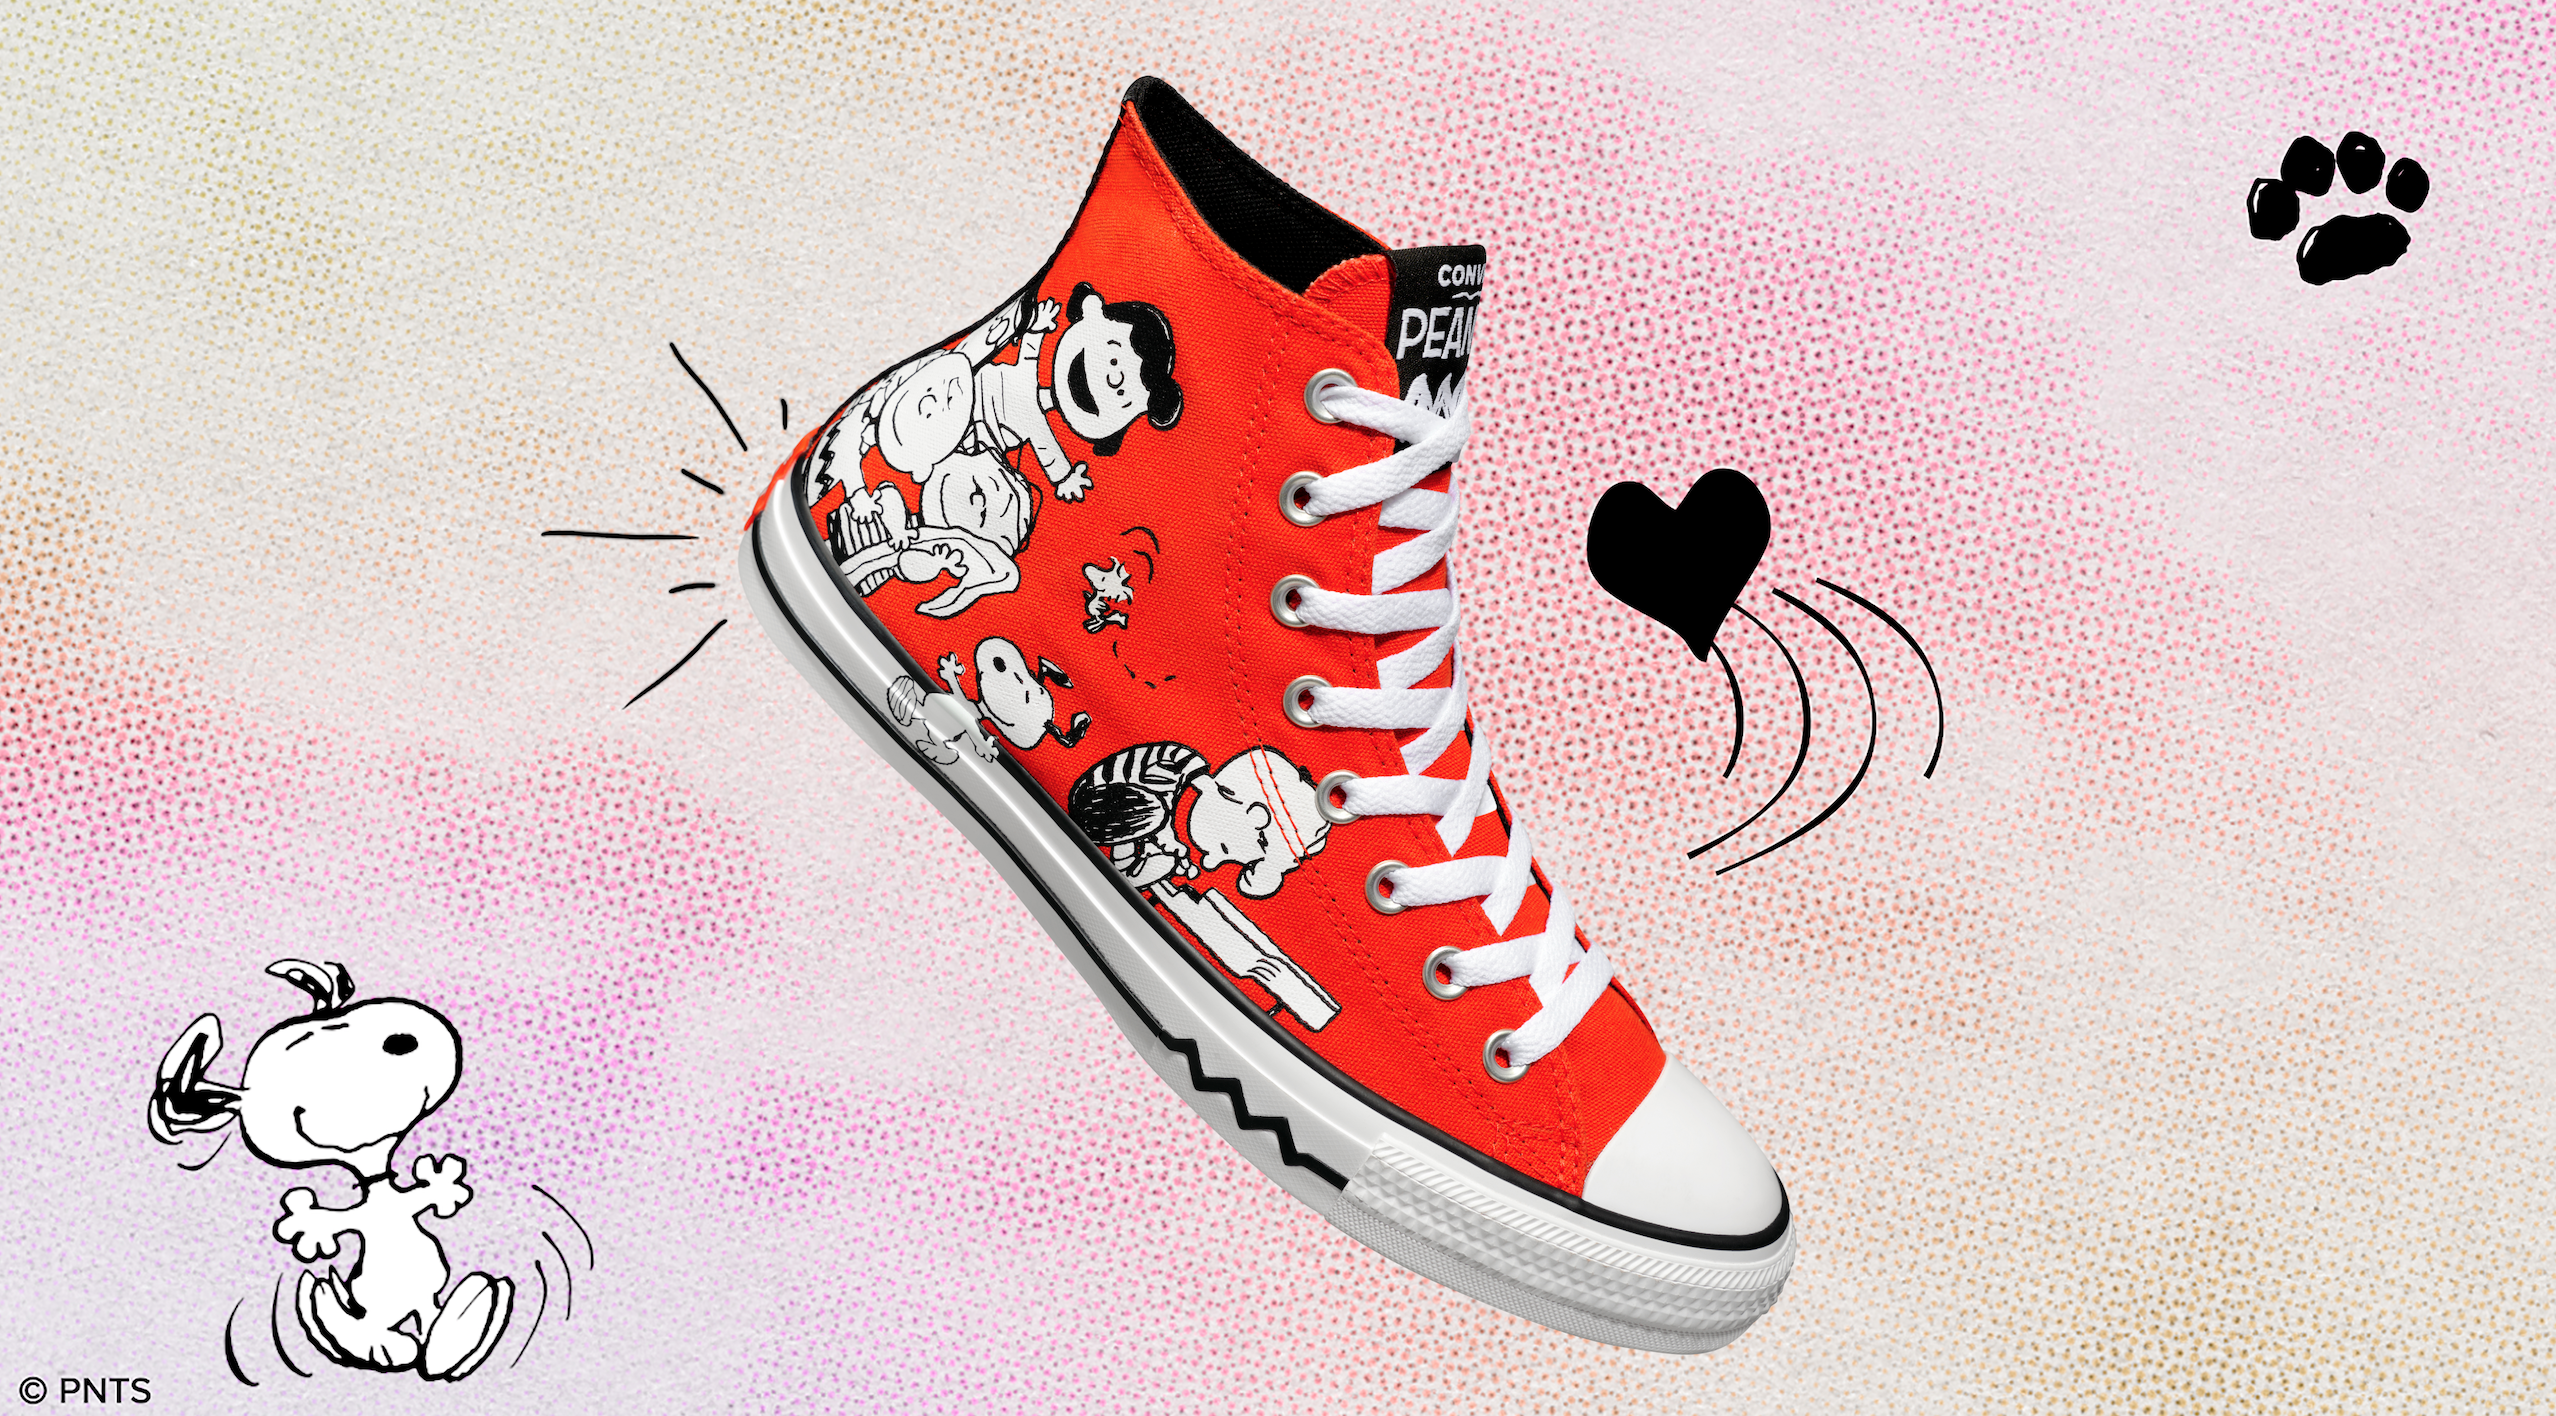 Good Grief! Converse Launches 'Converse x Peanuts' Collection